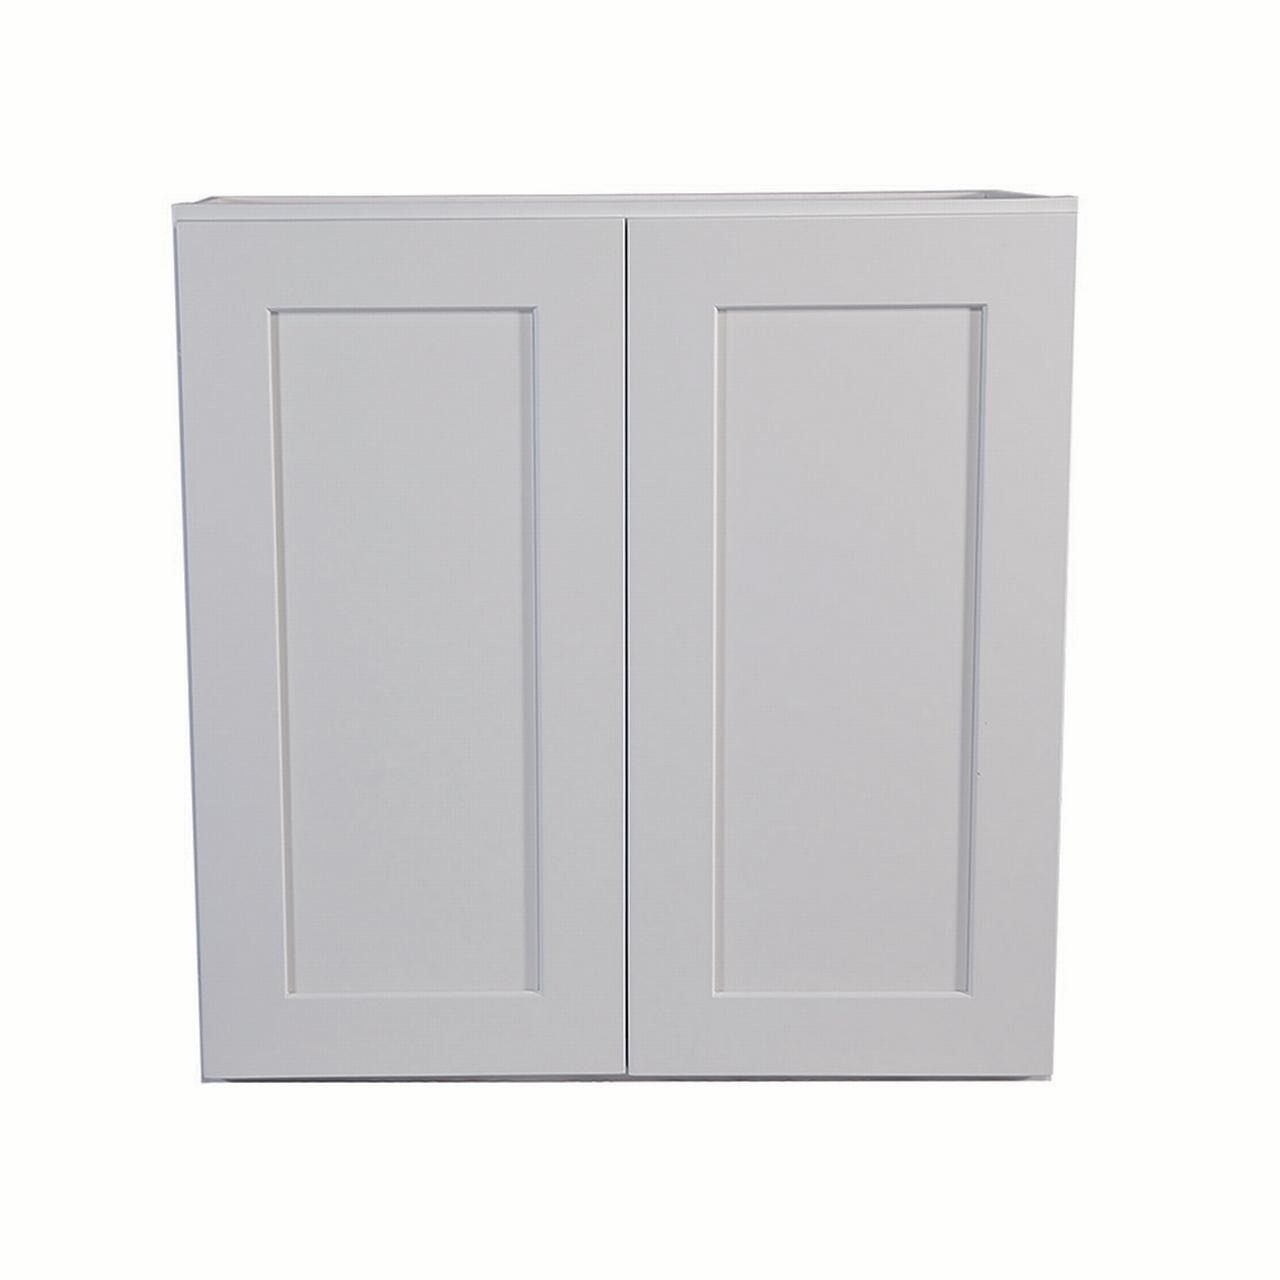 Design House 543132 Brookings Unassembled Shaker Wall Kitchen Cabinet 24x36x12, White